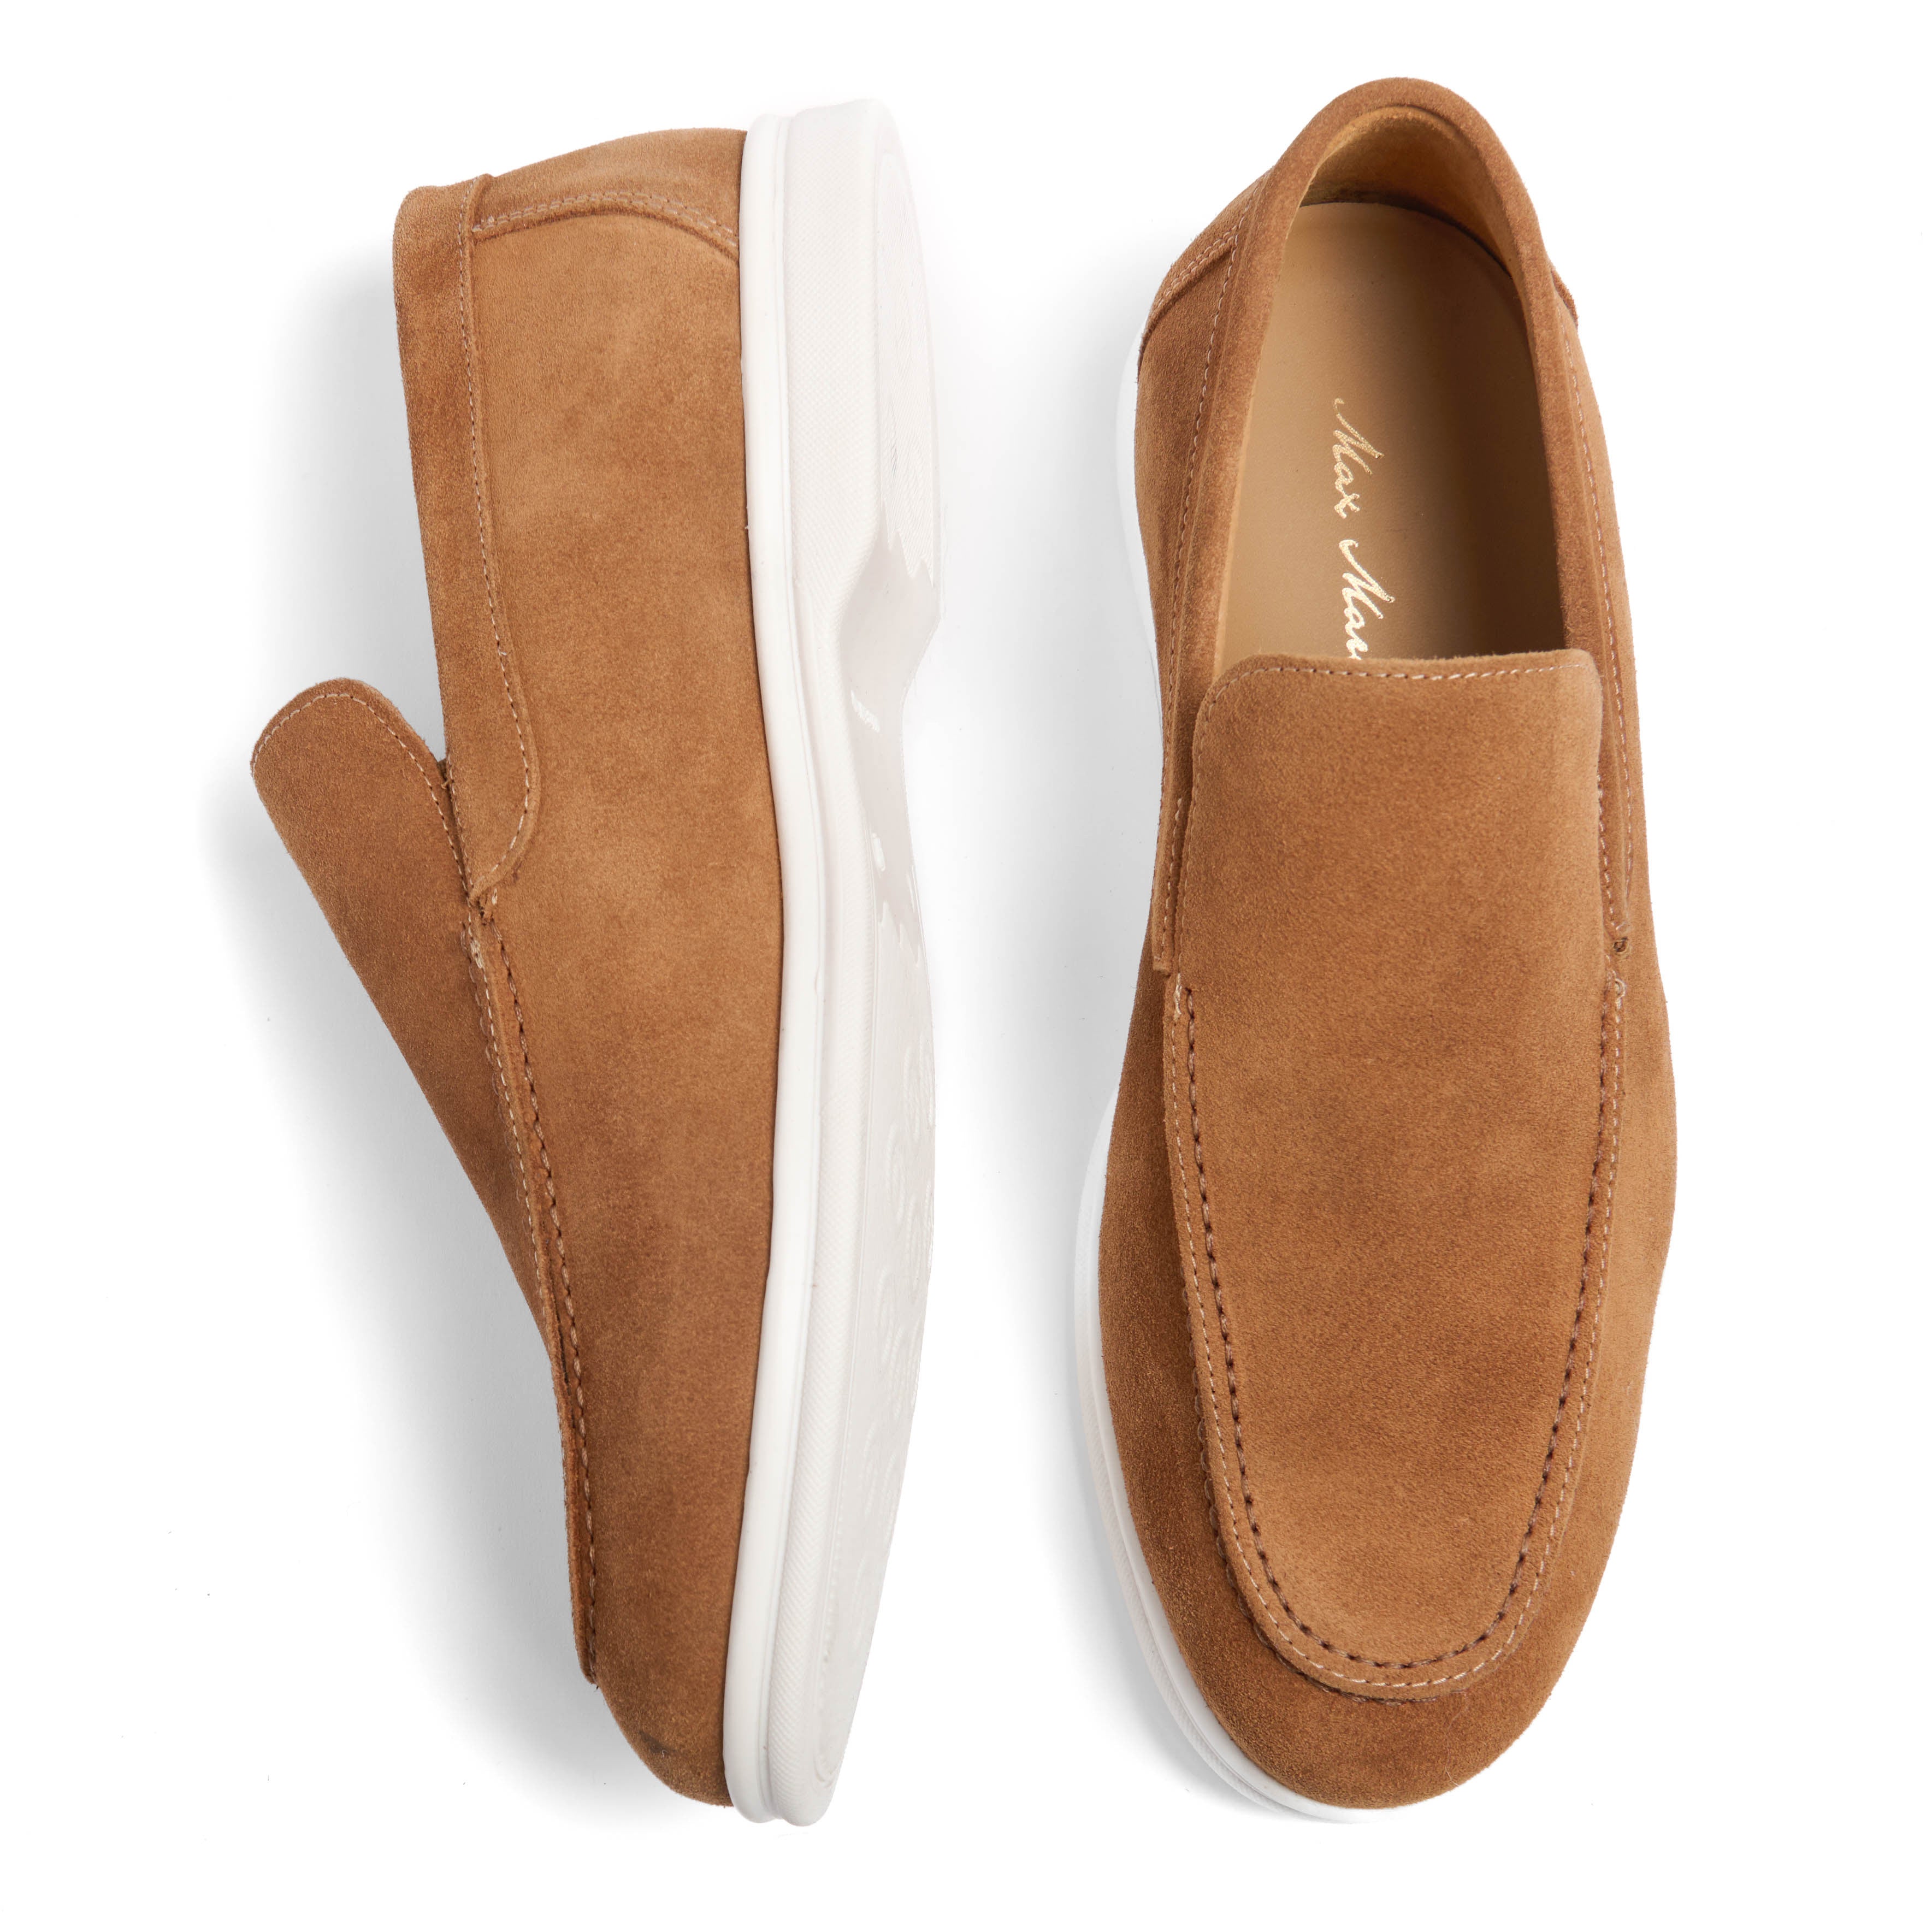 <tc>Moccasins Made in Italy</tc>